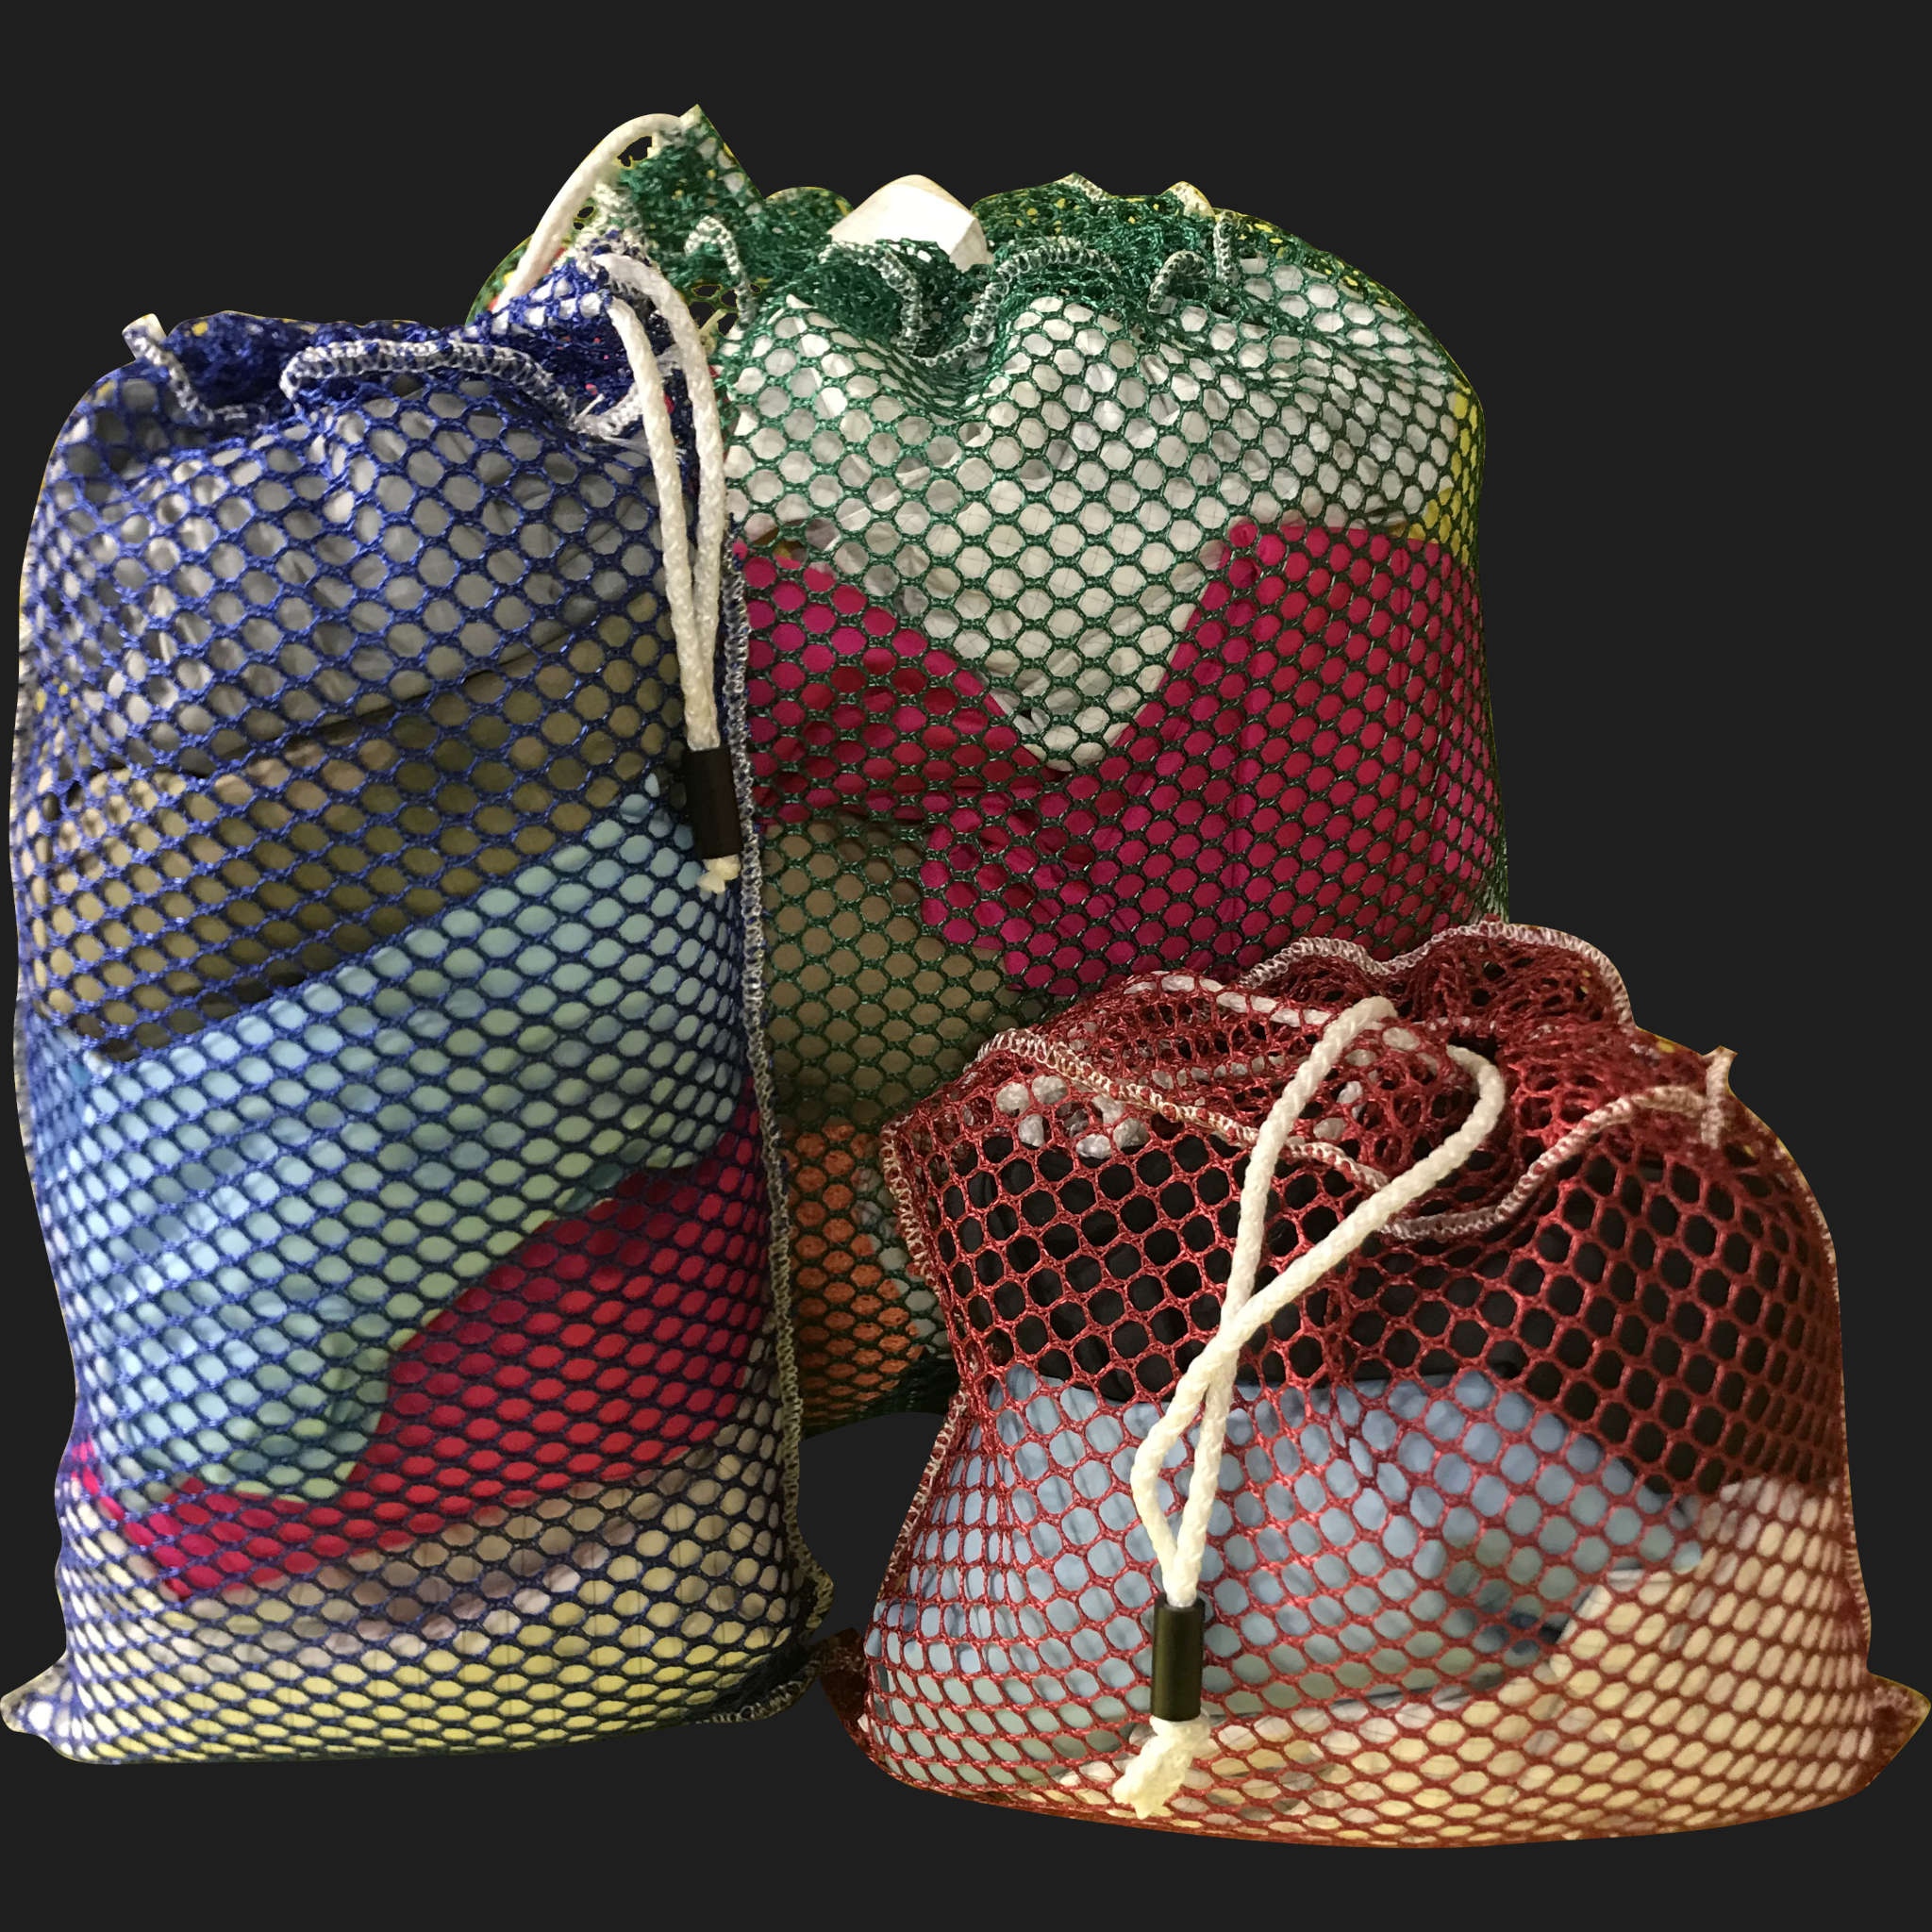 14" x 24" Customized Mesh-Net-Laundry Bags Heavy Duty with Cord and barrellock closure